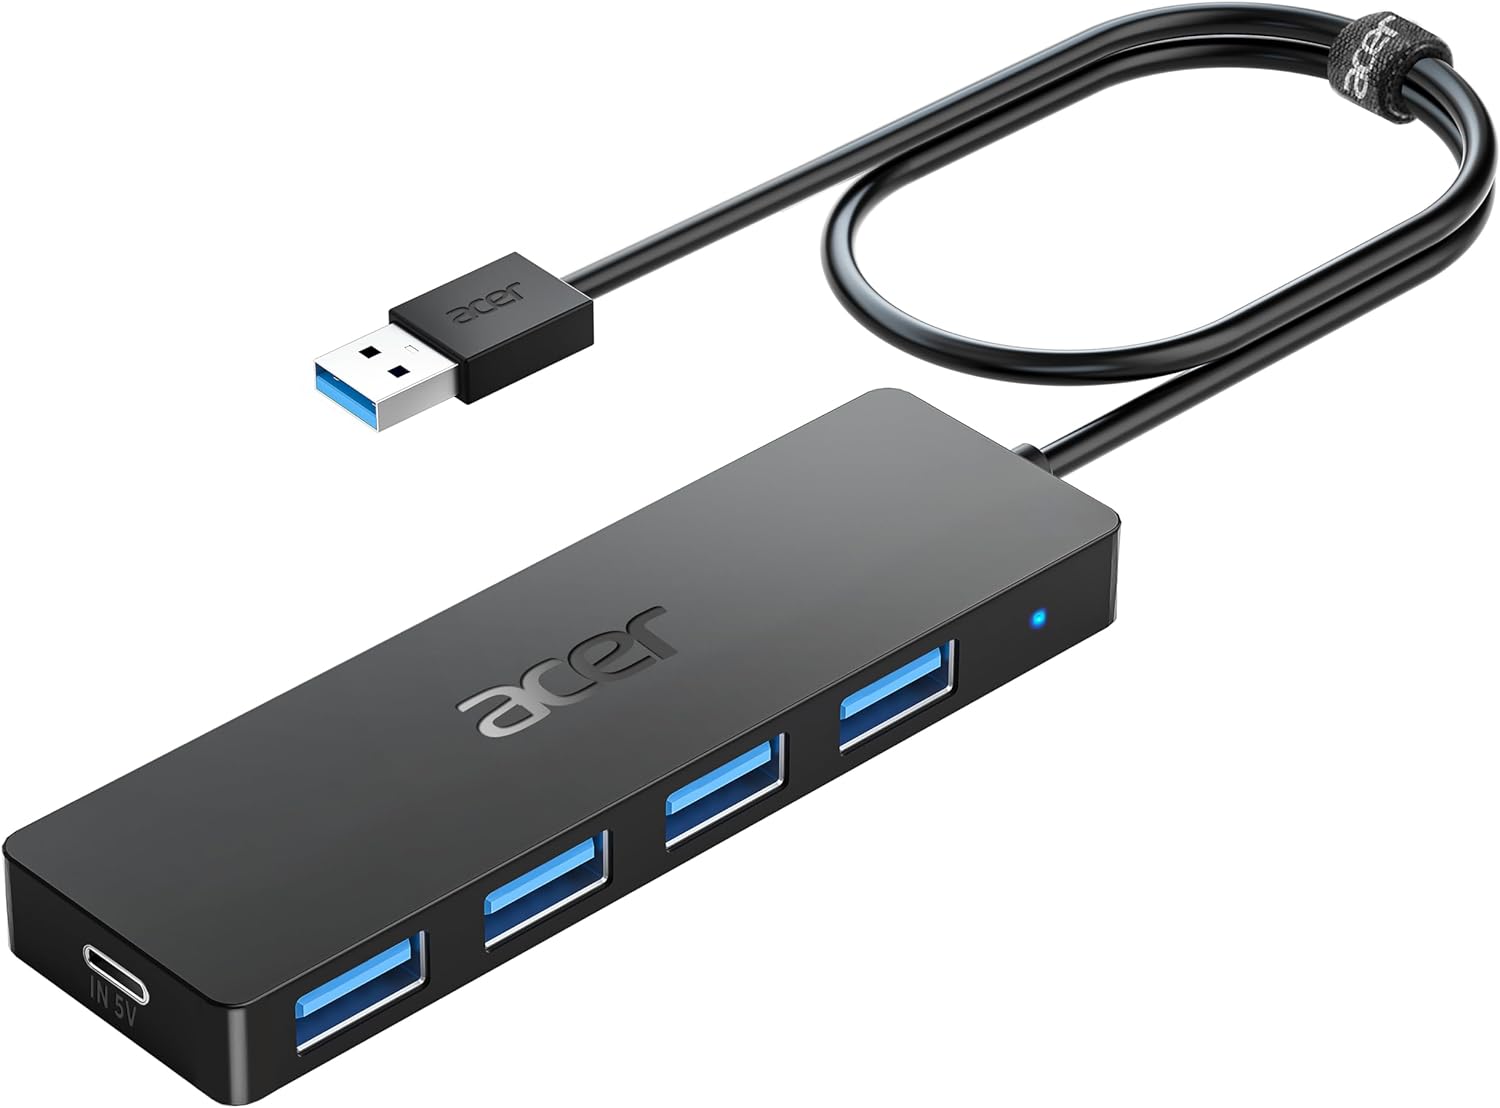 Acer USB Hub 4 Ports, Multiple USB 3.0 Hub, USB A Splitter for Laptop with USB C Power Port, USB Extender for A Port Laptop, Windows, Linux, Acer PC and More. 4 Ports USB 3.0 Hub: Acer USB Hub extends your device with 4 additional USB 3.0 ports, ideal for connecting USB peripherals such as flash drive, mouse, keyboard, printer. Note: The USB C power port is designed for a stable data transfer connection and does not charge the laptop. 5Gbps Data Transfer: The USB Adapter is designed with 4 USB 3.0 data ports, you can transfer movies, photos, and files in seconds at speed up to 5Gbps. When connecting devices that require power, you can charge through the 5V USB C power port to ensure stable and fast data transmission. Excellent Technical Design: Build-in advanced GL3510 chip with good thermal design, keeping your devices and data safe. Plug and play, no driver needed, supporting 4 ports to work simultaneously and can improve your work efficiency. Portable Design & Wide Compatibility: The USB extension for pc is slim and lightweight with a 2ft cable, making it easy to carry anywhere. This USB connector with Windows, Linux, Thinkpad, Acer Swift/Aspire/Spin and other Acer models, Laptop, PC, Desktop. What You Get: You can get this USB Hub with broad compatibility for a wide range of USB A Port devices, as well as our friendly 24-hour service and a 12-month guarantee. Wide Compatibility: Crafted with a high-quality housing for enhanced durability and heat dissipation, this USB-A expansion is for Acer, XPS, PS4, Xbos, Laptops, and Works on Windows, ChromeOS, Linux.